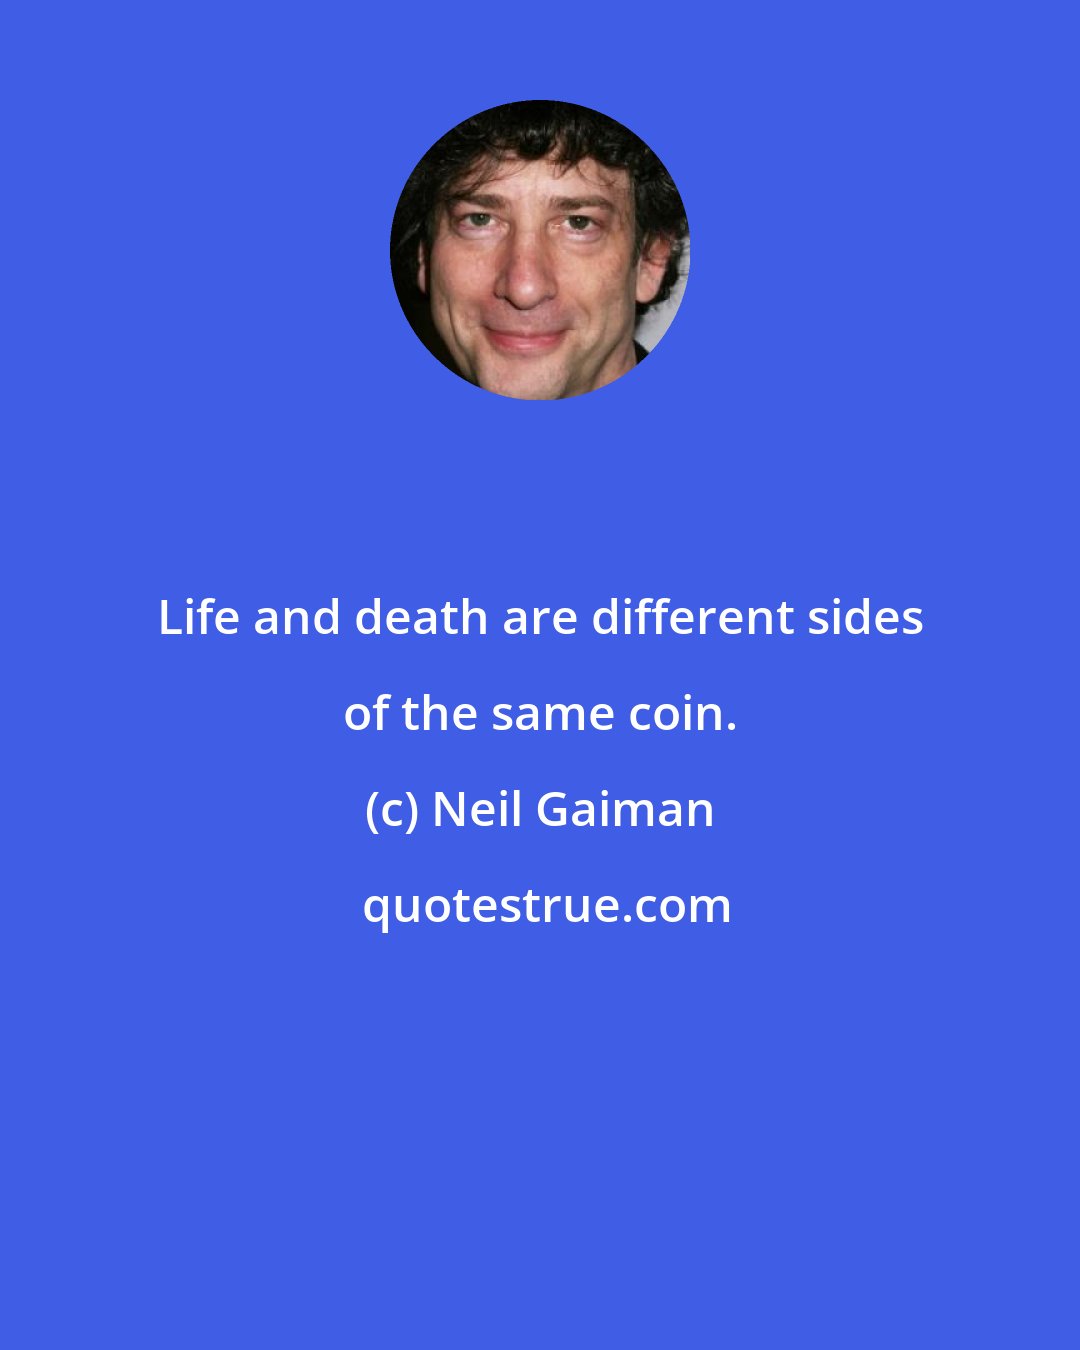 Neil Gaiman: Life and death are different sides of the same coin.